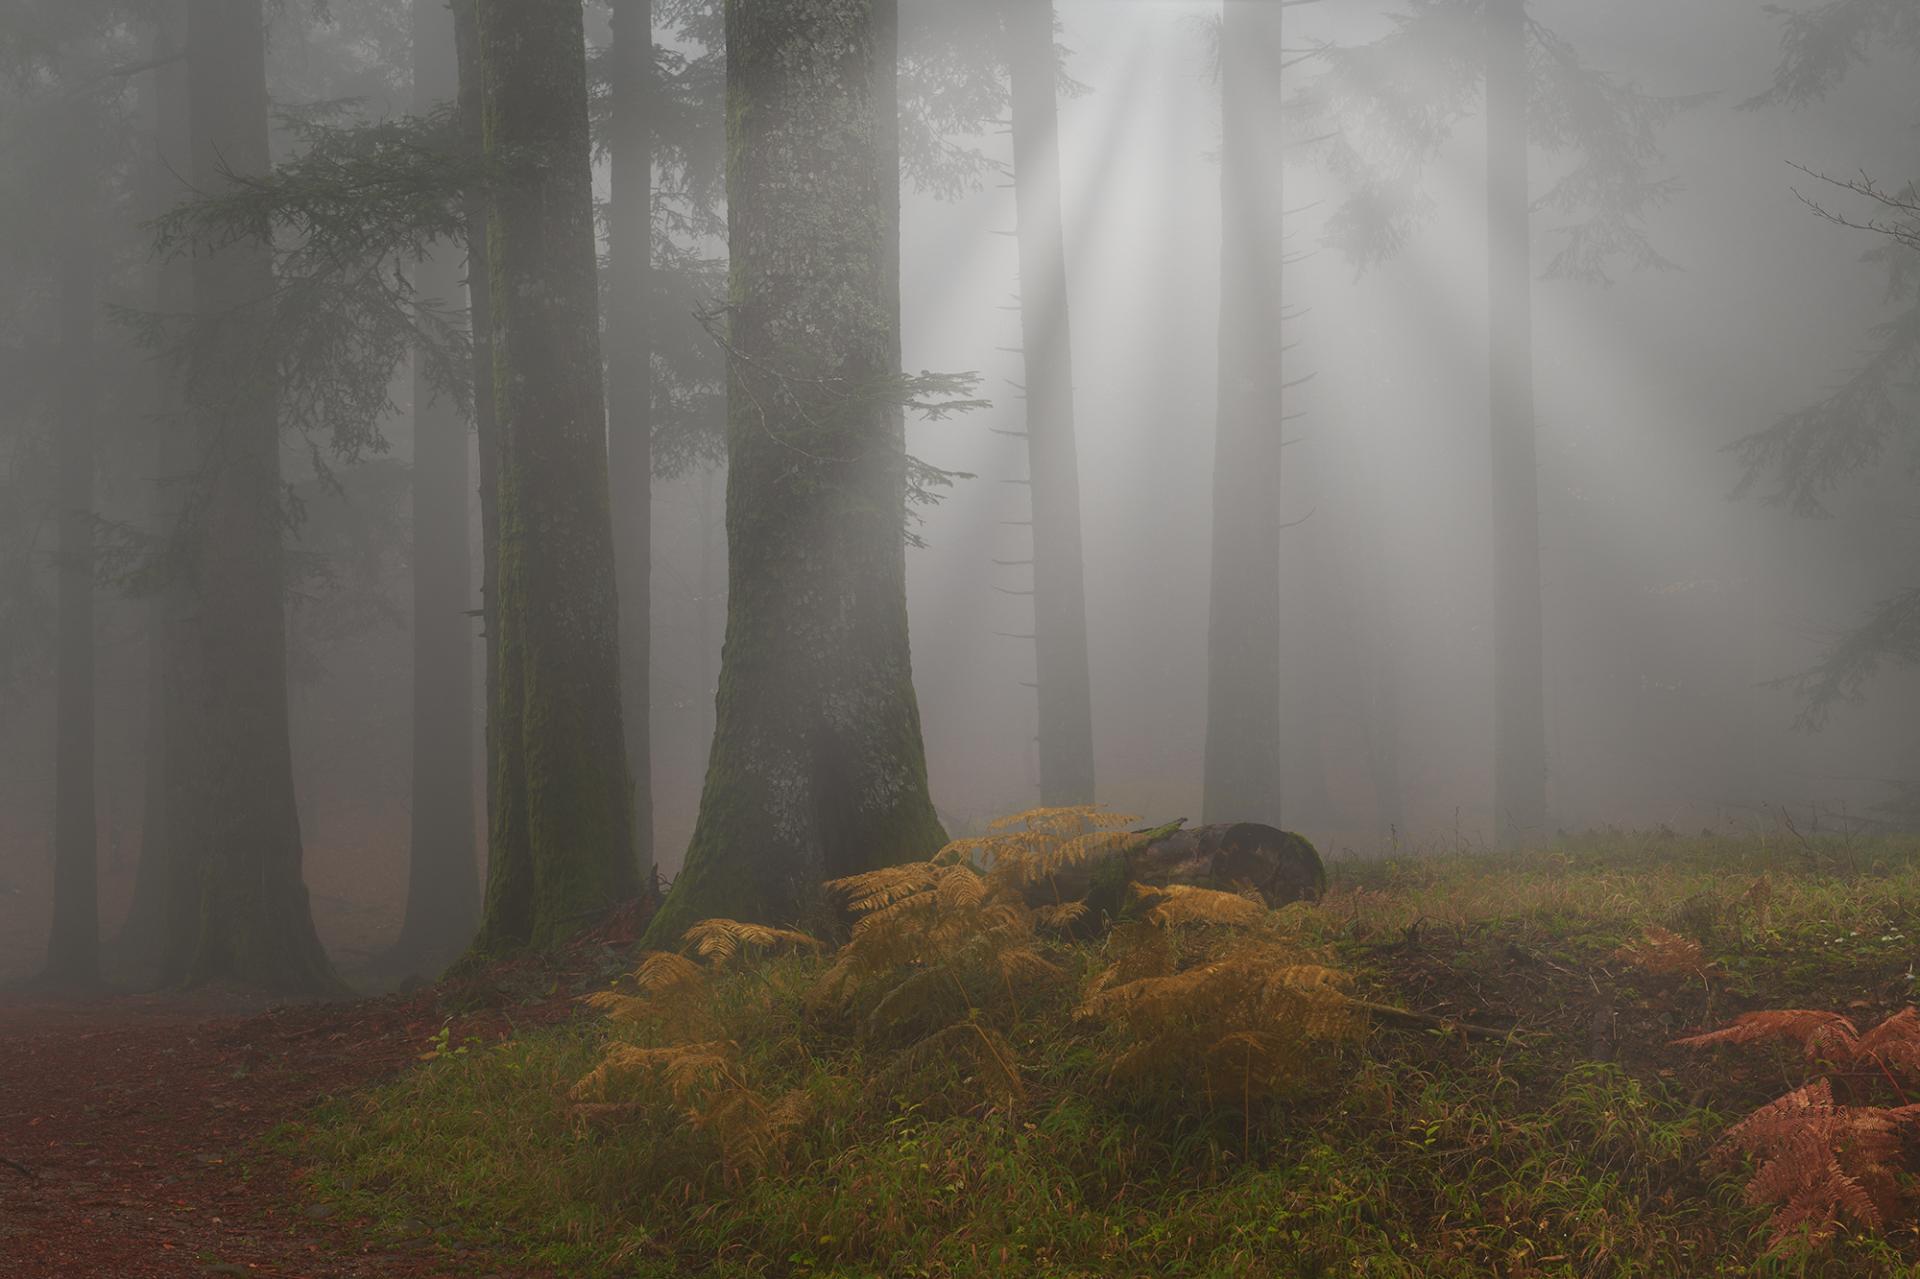 New York Photography Awards Winner - The Forest